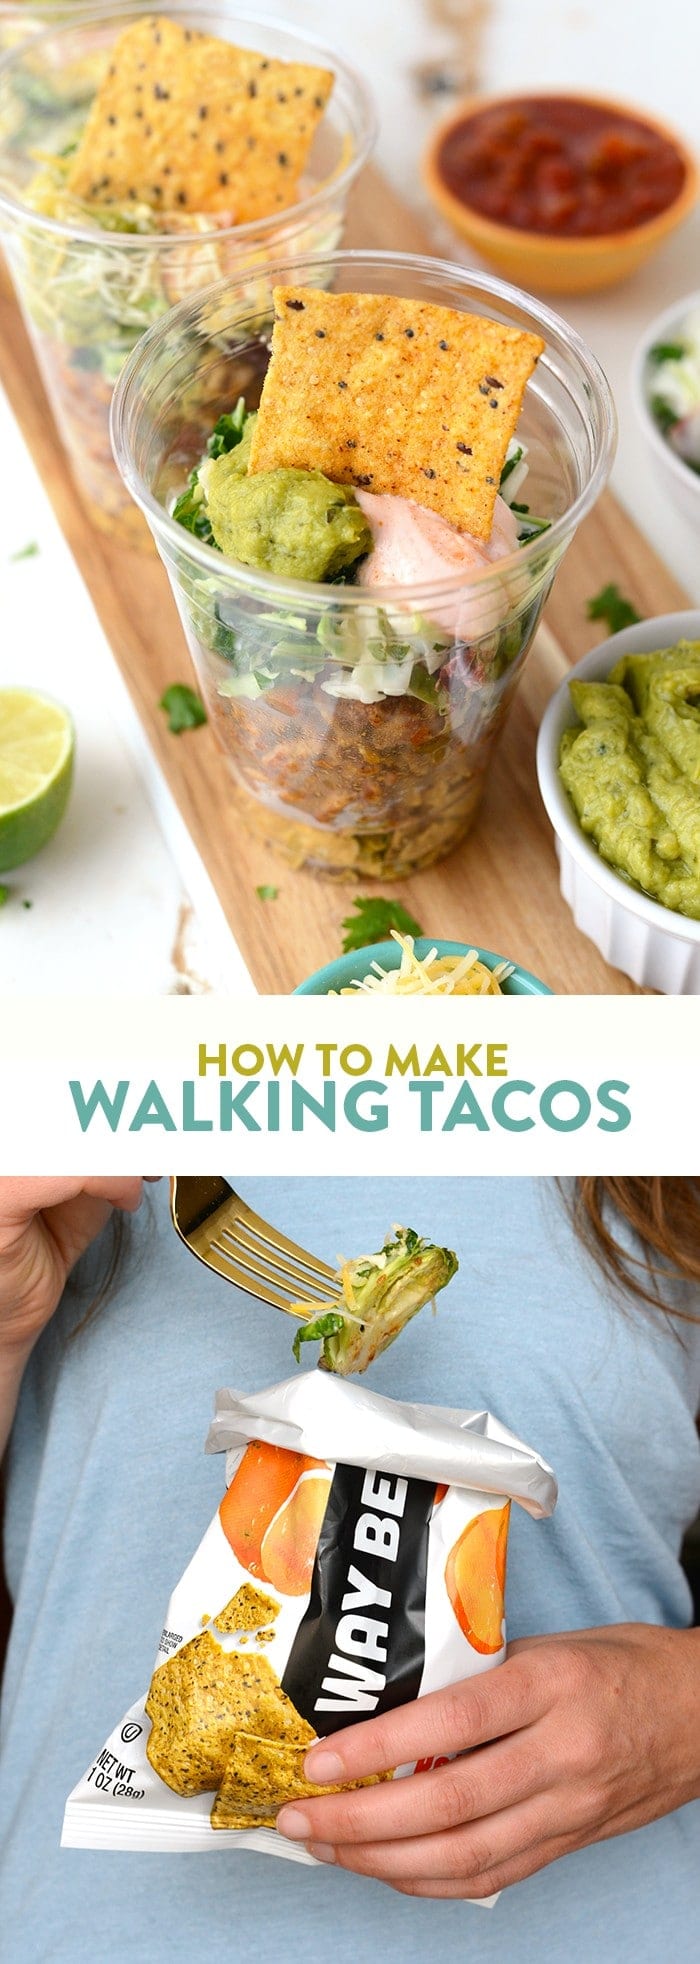 Up your walking taco game with my favorite Way Better Snacks, lean ground turkey taco meat, and a delicious kale slaw topped with all of your favorite fixings!